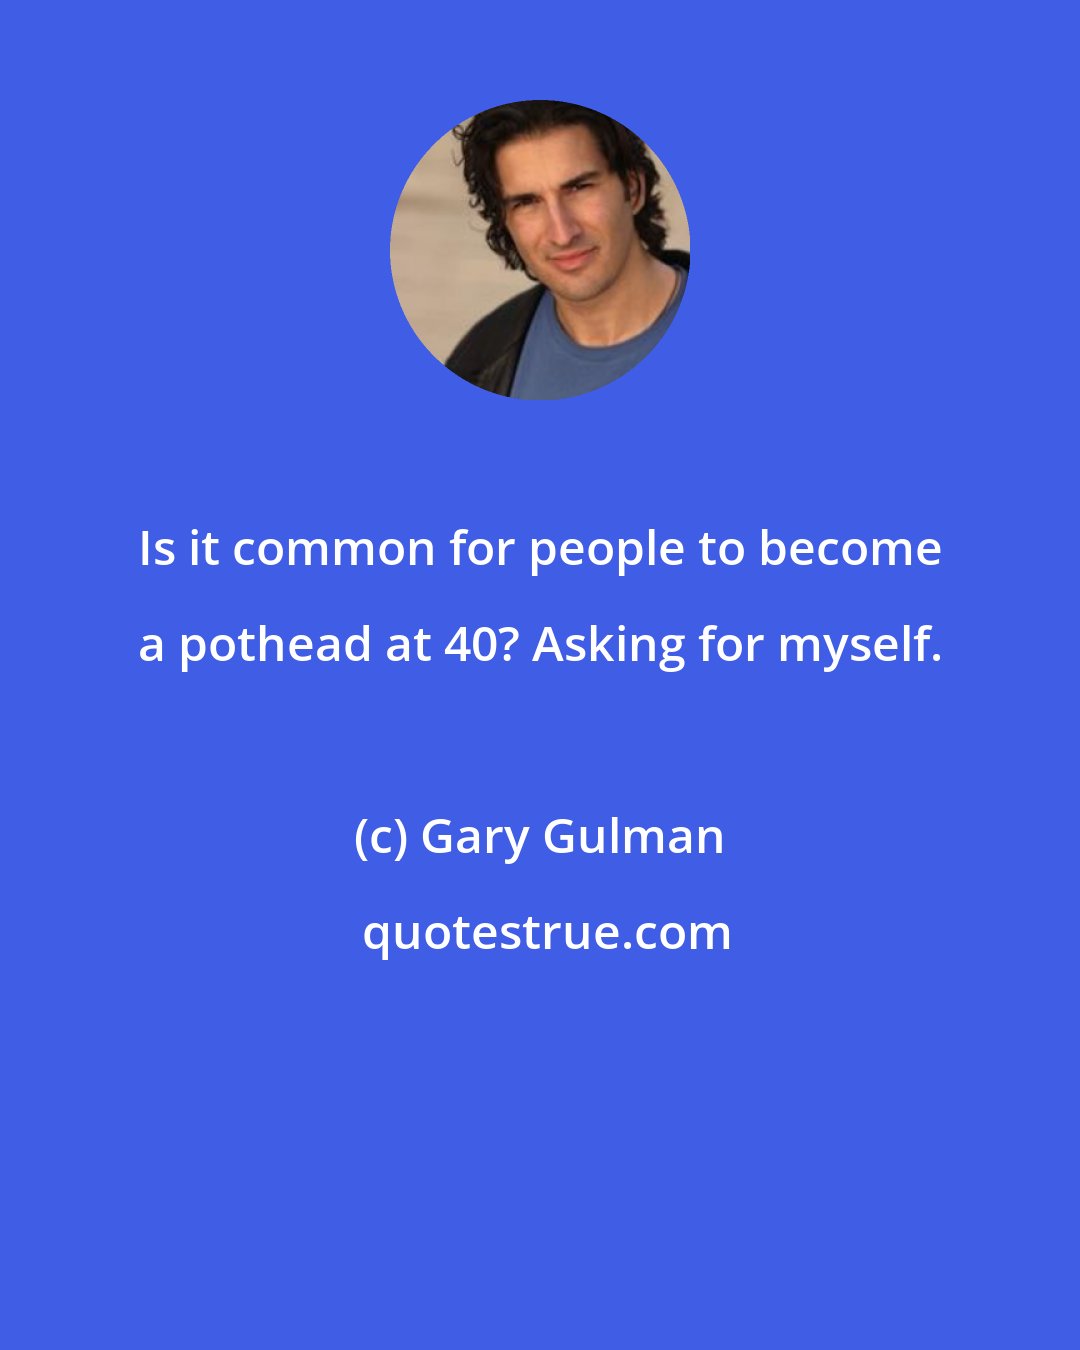 Gary Gulman: Is it common for people to become a pothead at 40? Asking for myself.